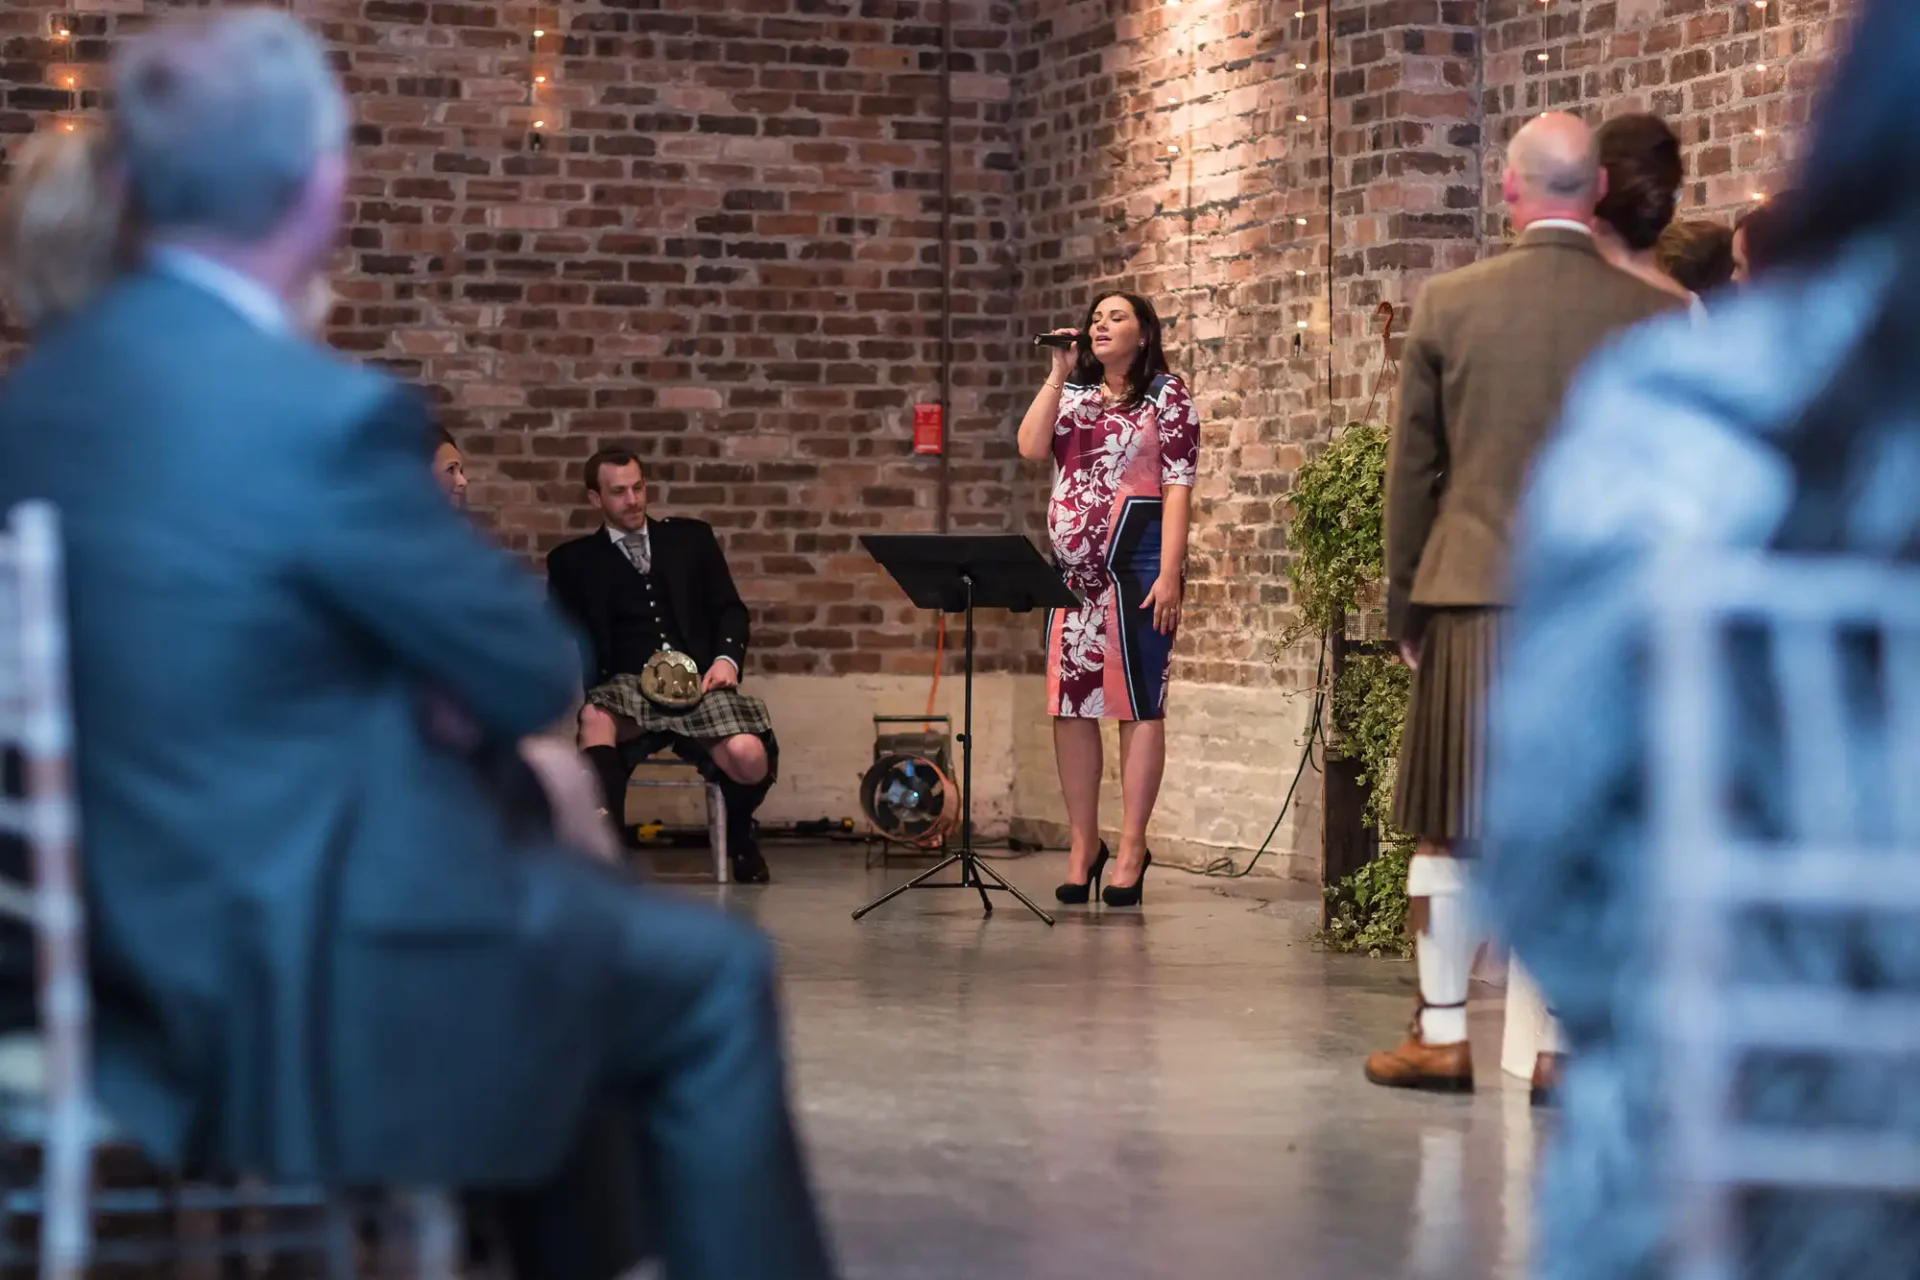 A woman singing into a microphone at a cozy event, with guests and a brick wall in the background, and a seated musician playing accordion.